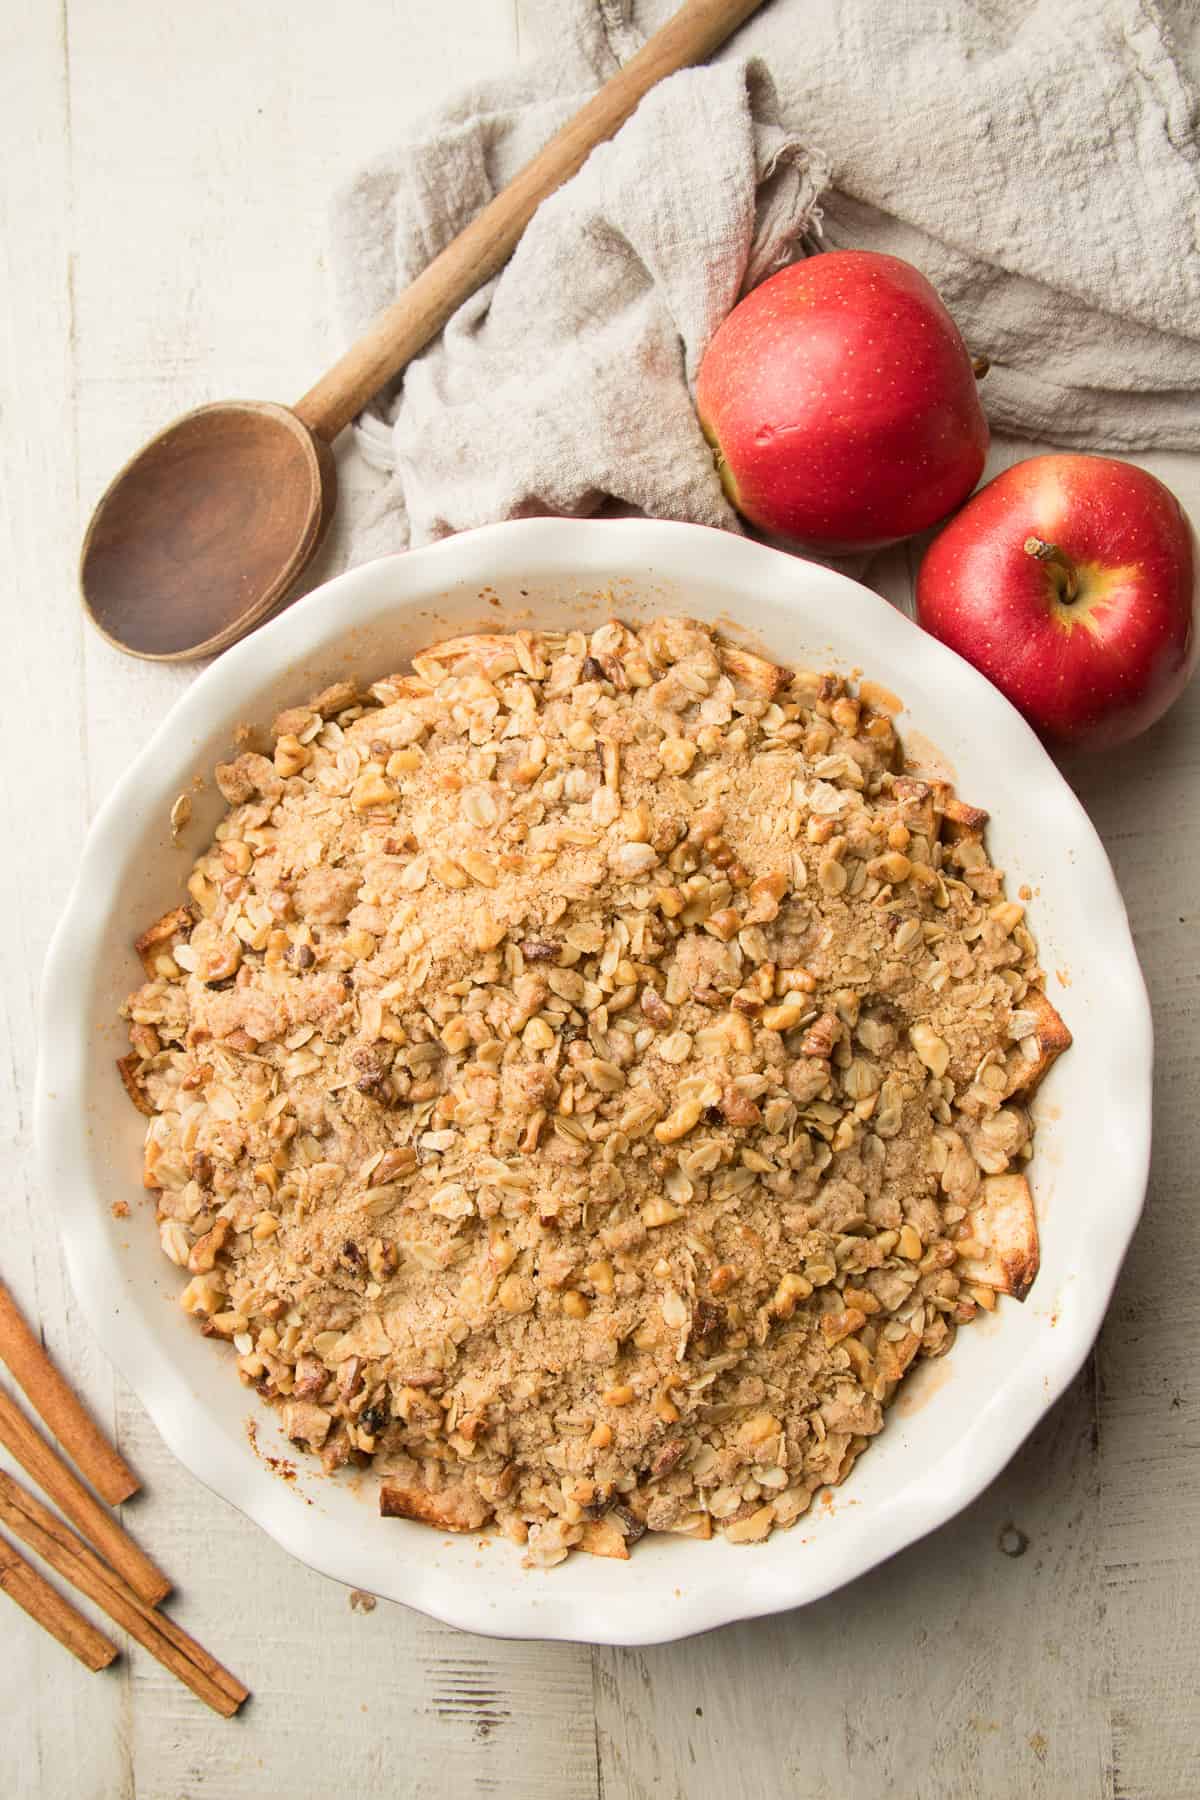 Baking Dish of Vegan Apple Crisp with Apples, Cinnamon Sticks and Wooden Spoon on the Side